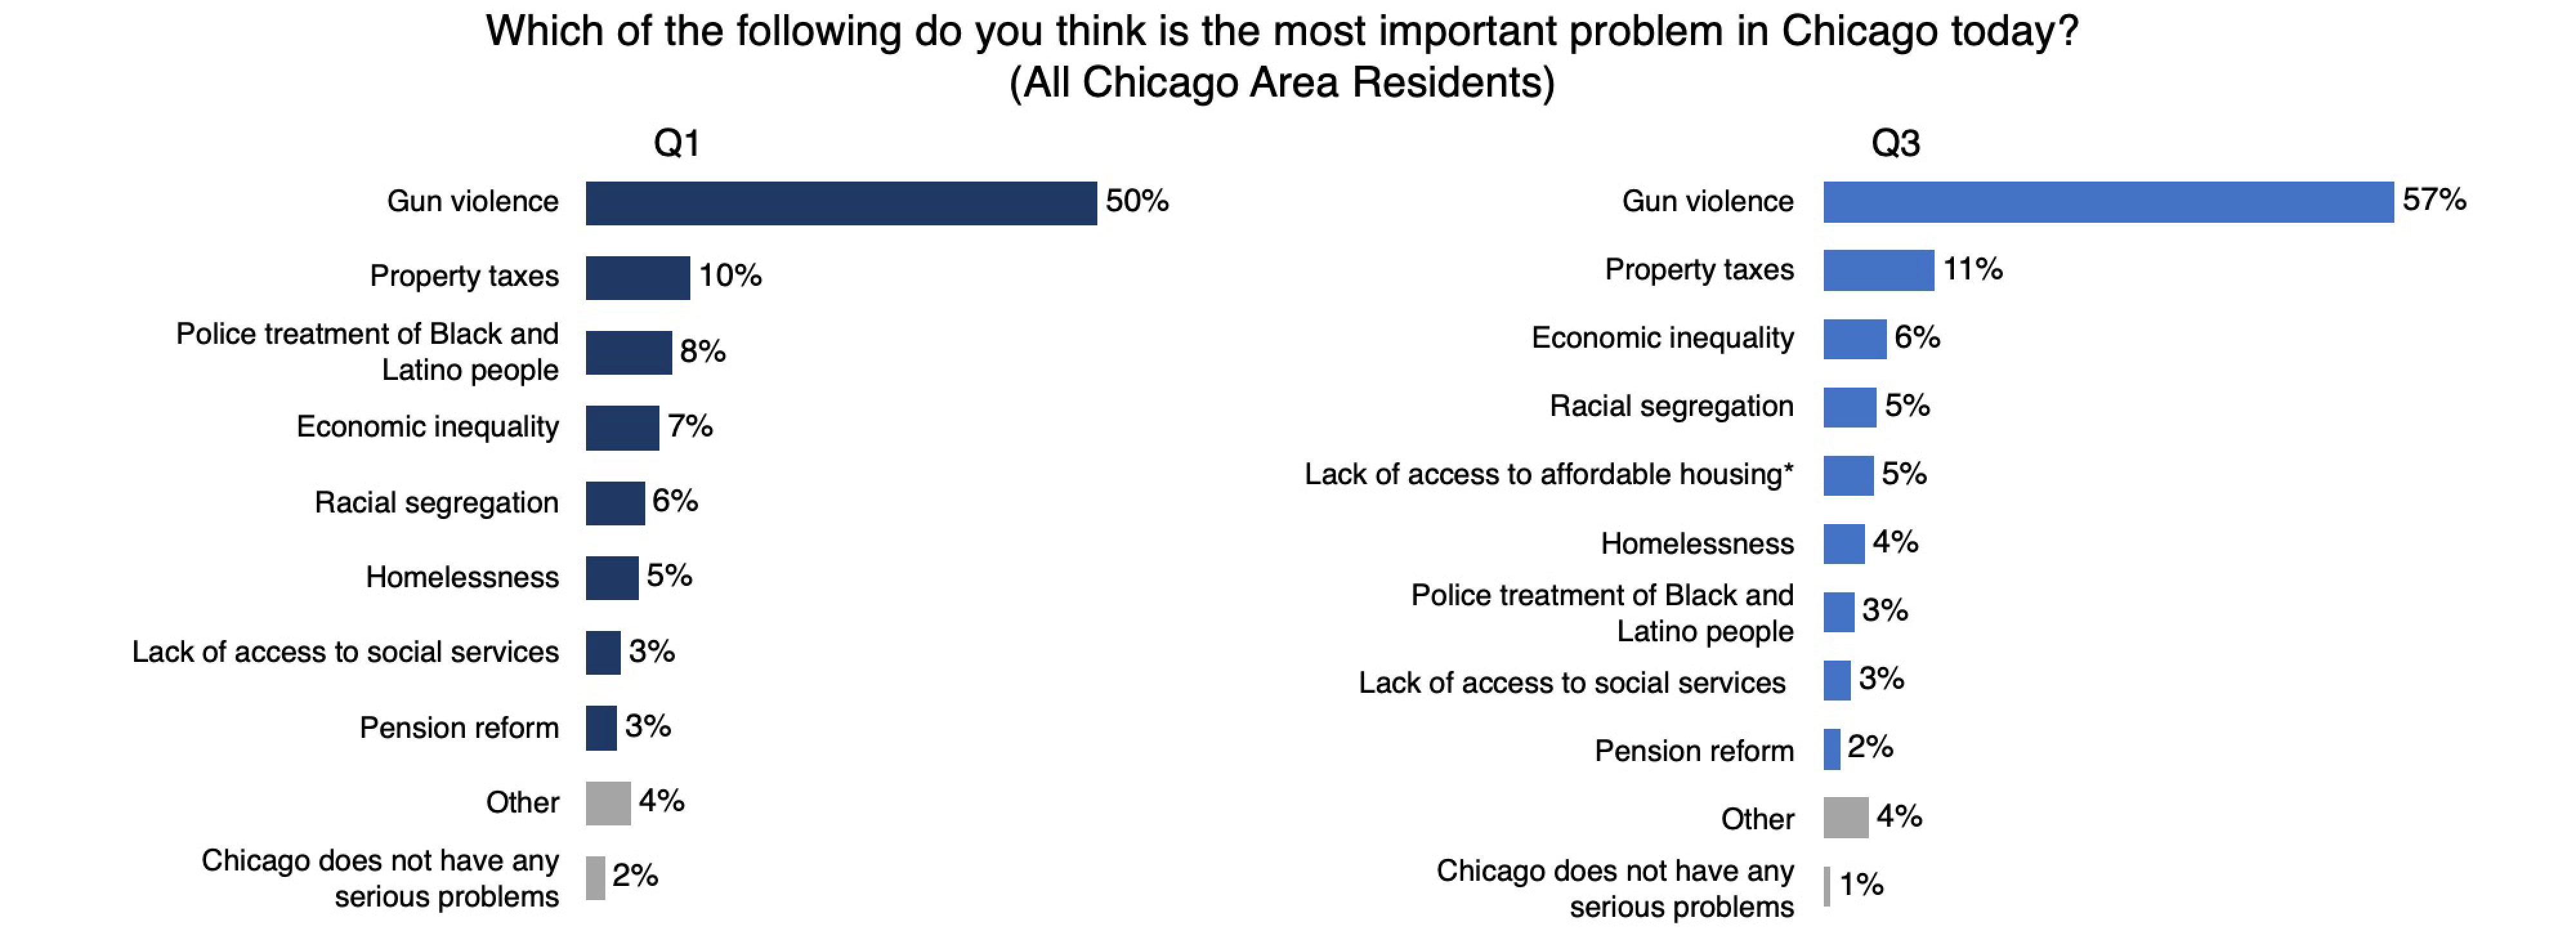 graph of most important problems in Chicago today according to Chicago Area Residents